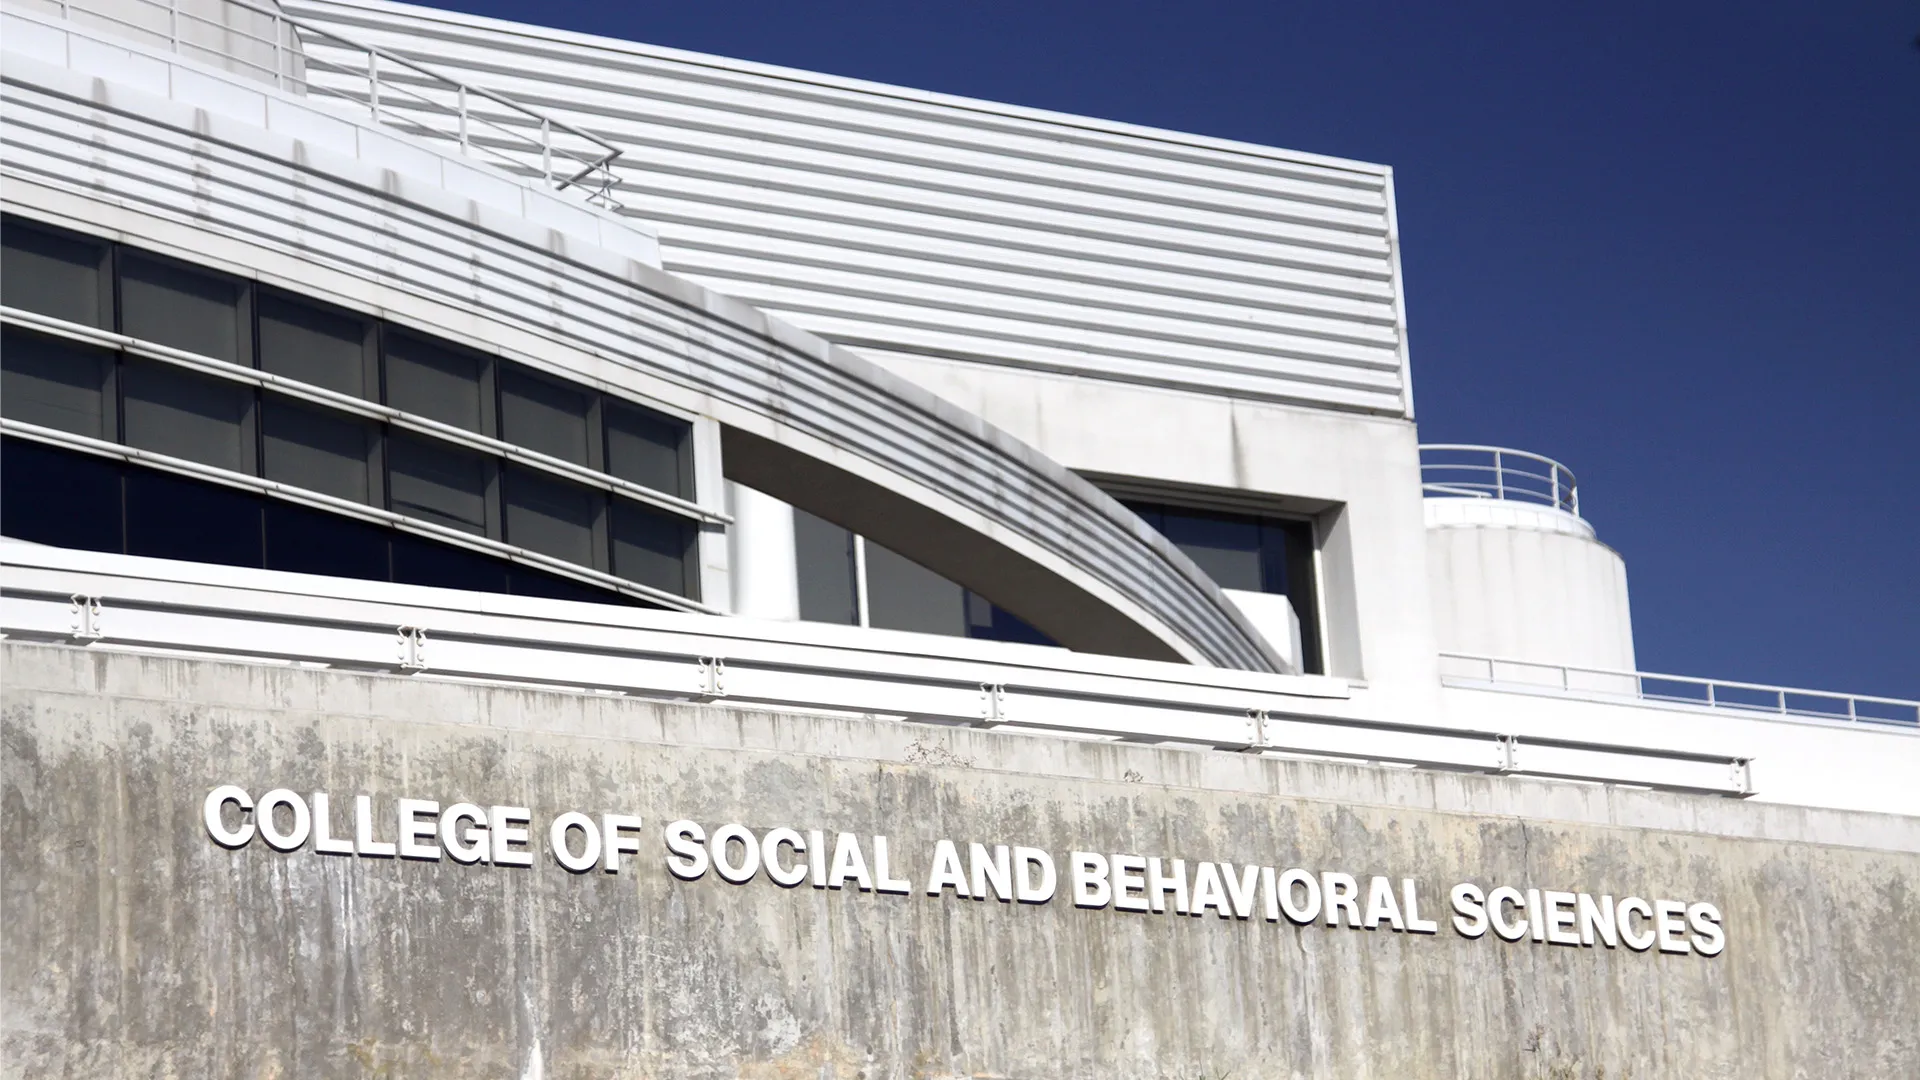 College of Social and Behavioral Sciences building